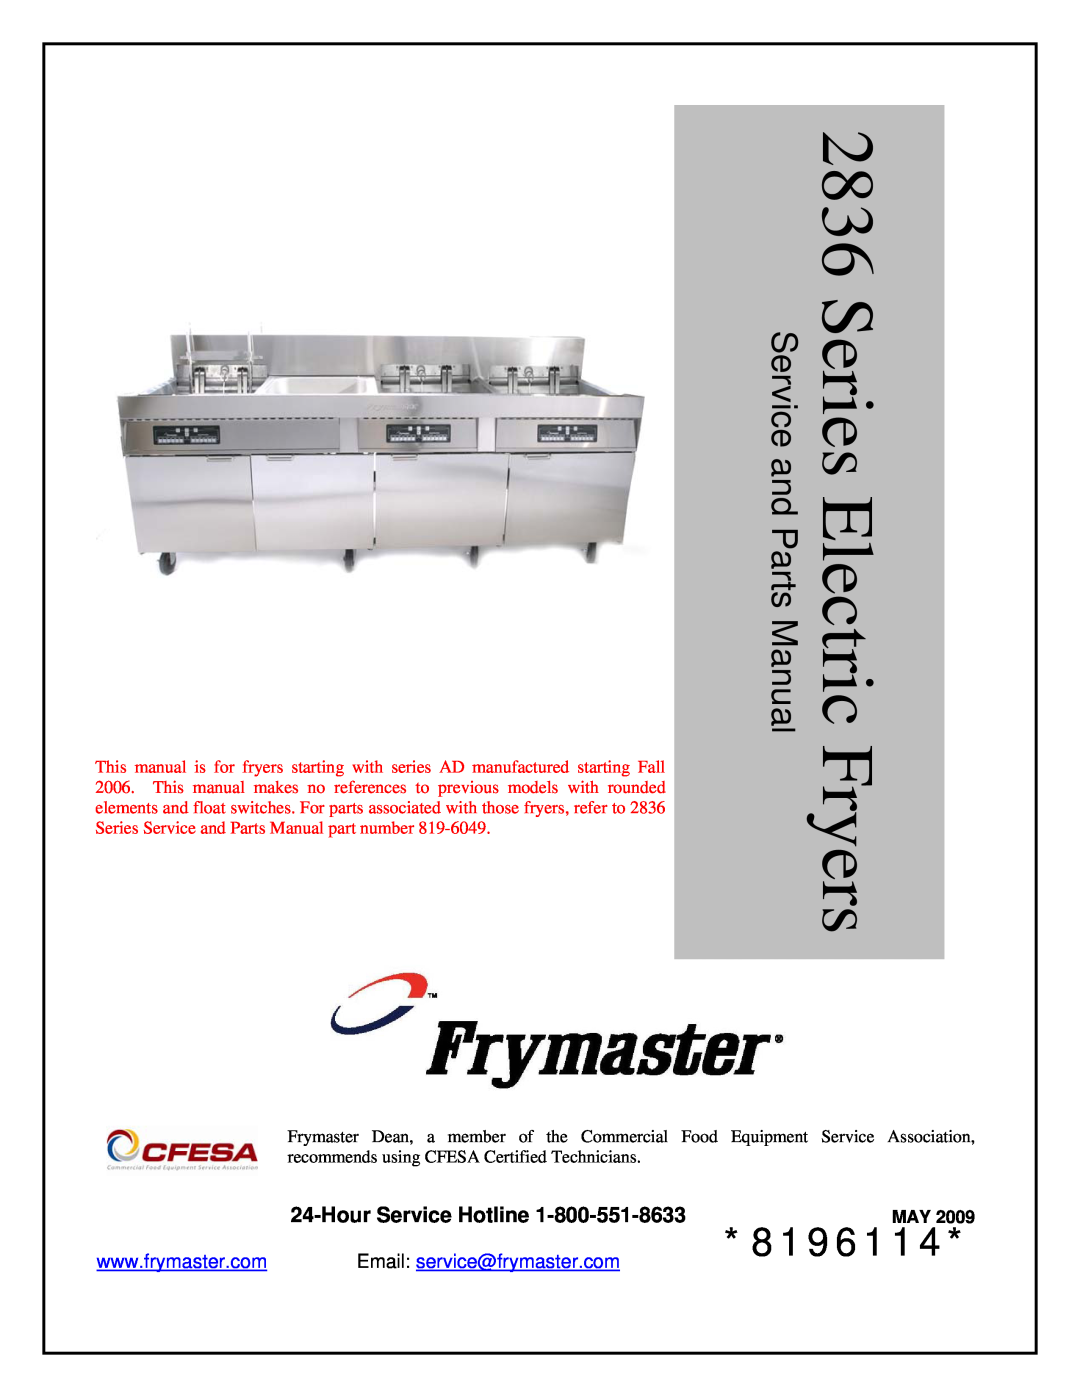 Frymaster 2836 manual 8196114, Hour Service Hotline, Series Electric Fryers Service and Parts Manual 